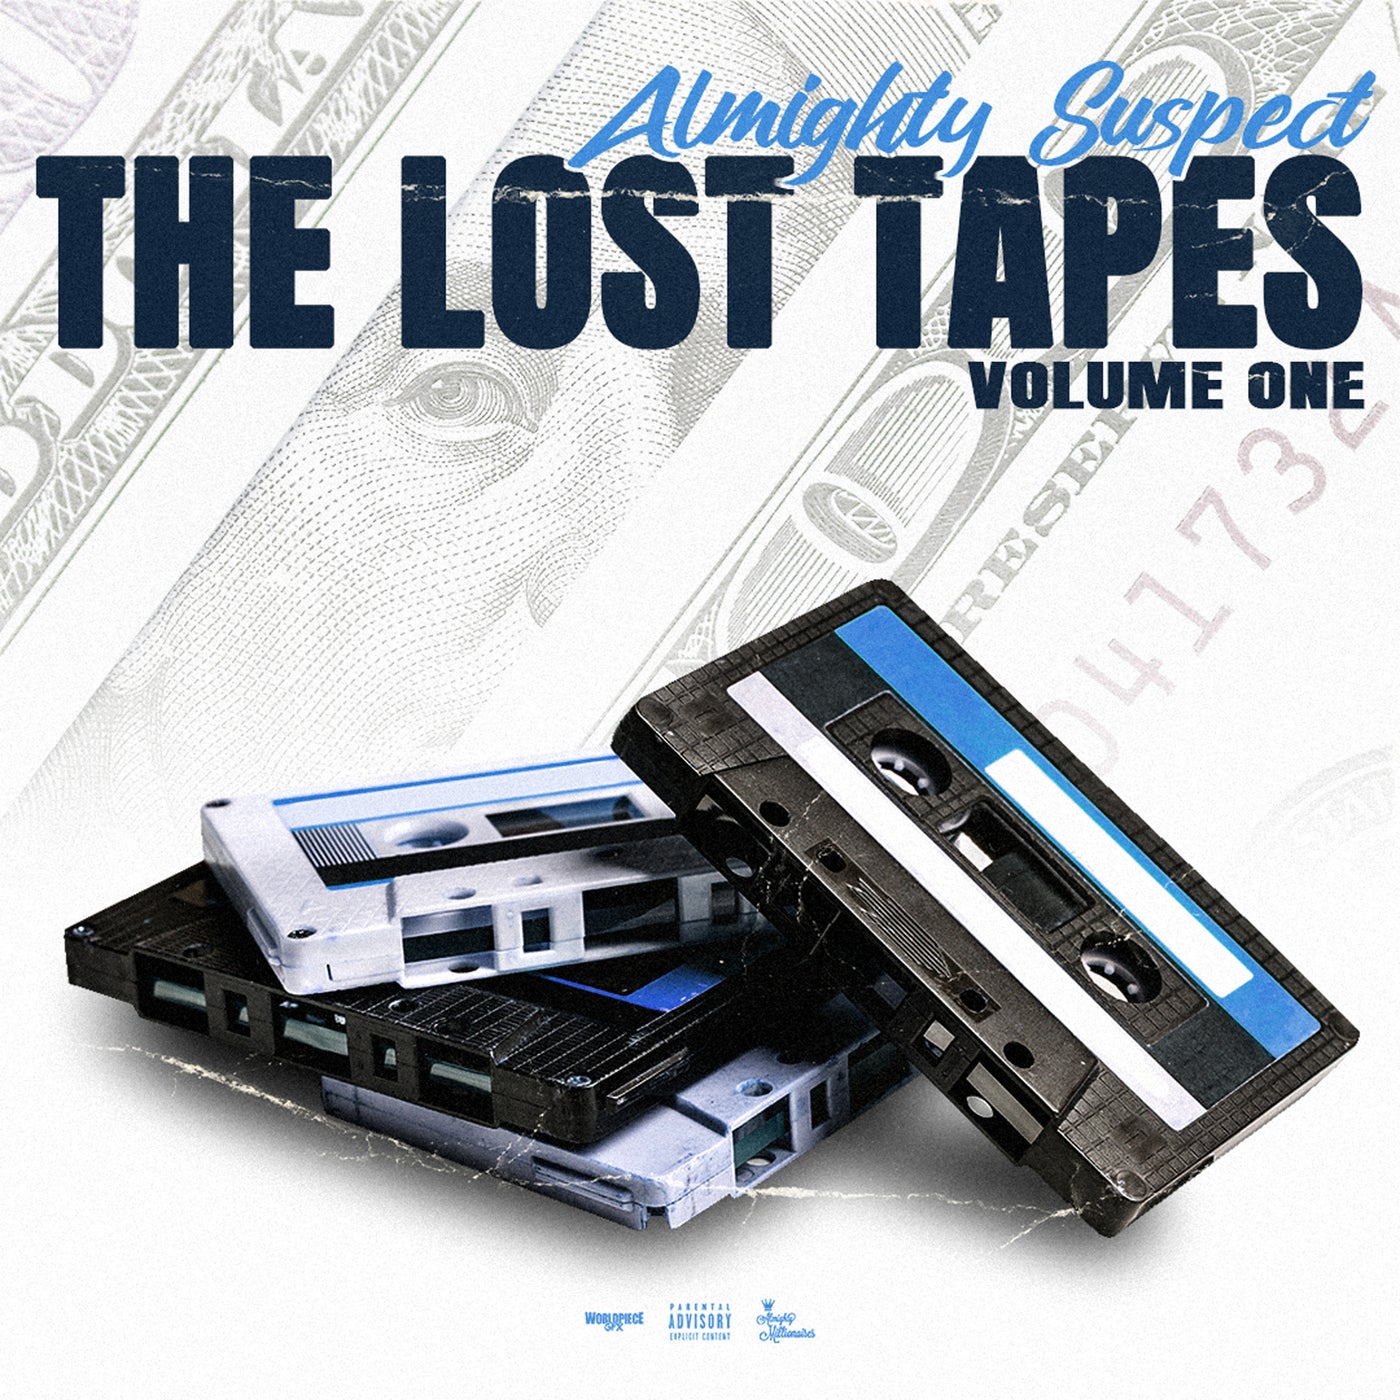 The Lost Tapes Volume One